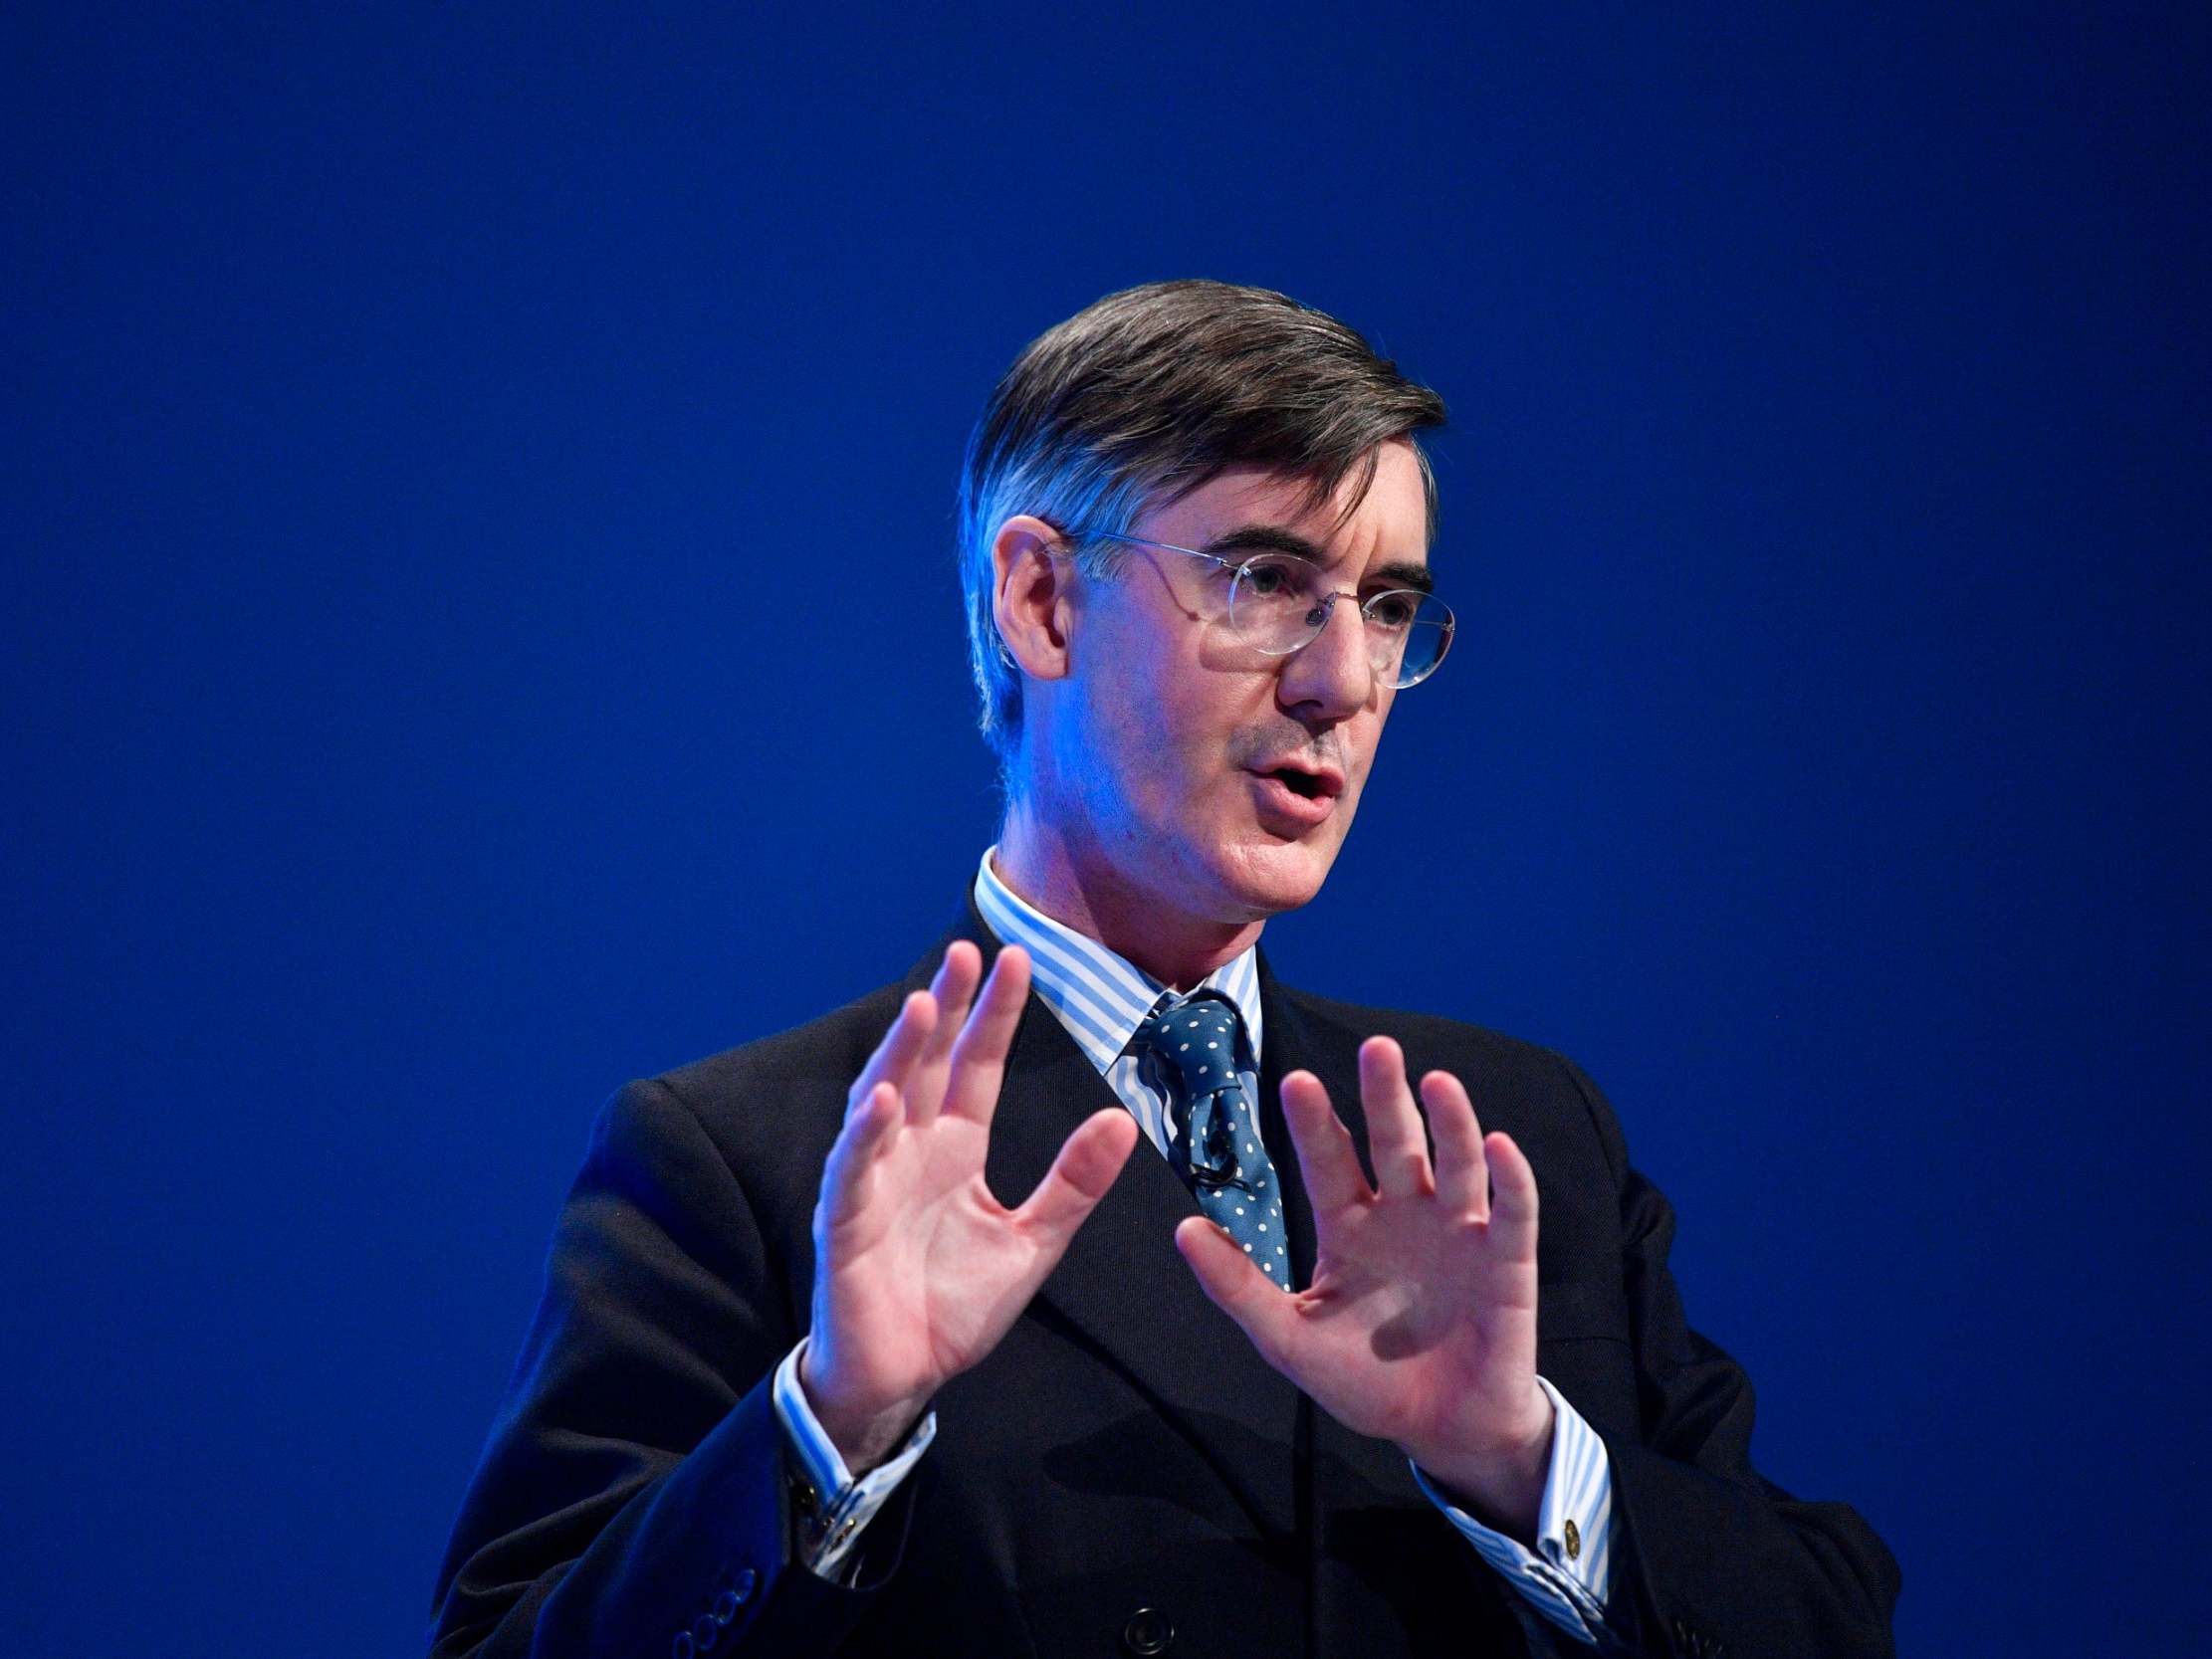 Jacob Rees-Mogg has claimed that Jeremy Corbyn should be hailed for his role in allowing Brexit to go ahead